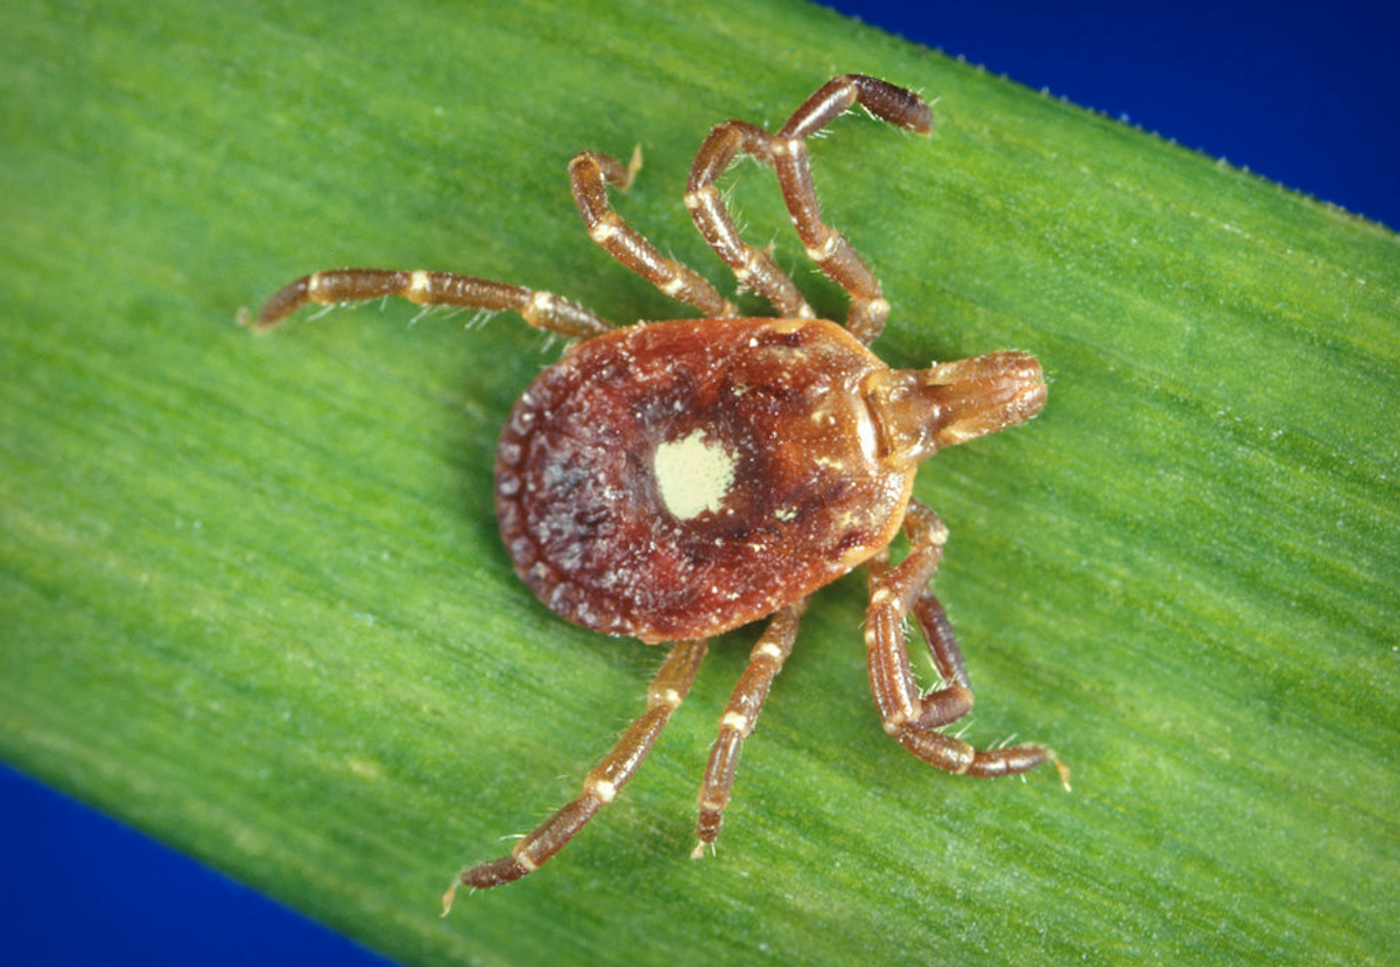 A female Lone star tick, Amblyomma americanum, which can be found in the southeastern and midatlantic United States. / Credit: CDC/ Michael L. Levin, Ph.D.